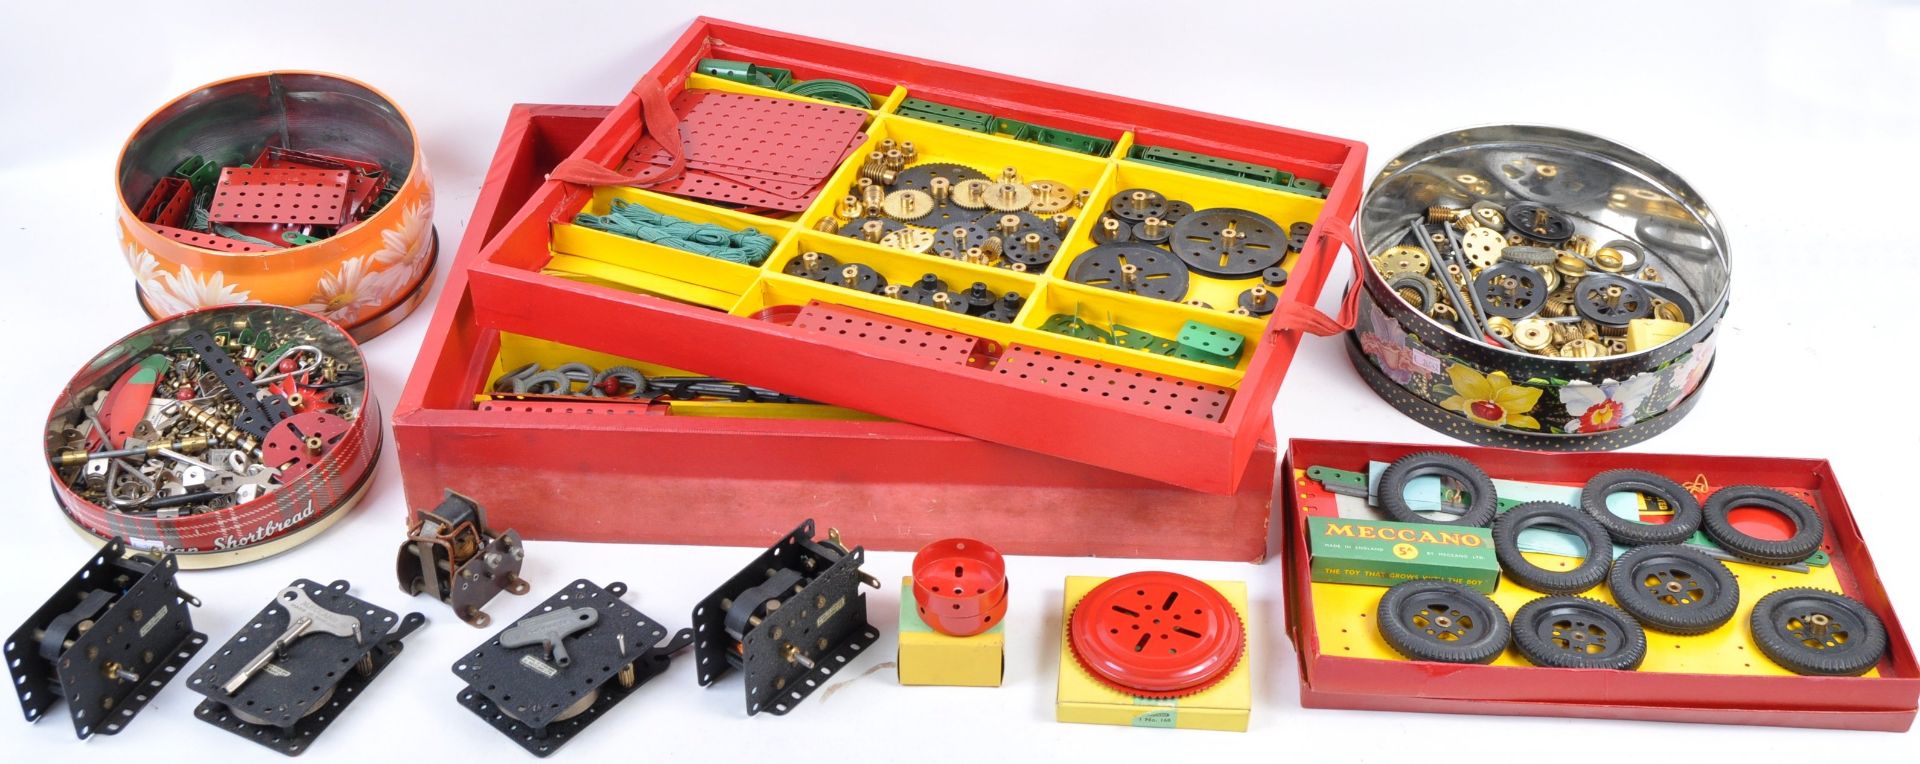 BOXED MECCANO CONSTRUCTION SETS COLLECTION